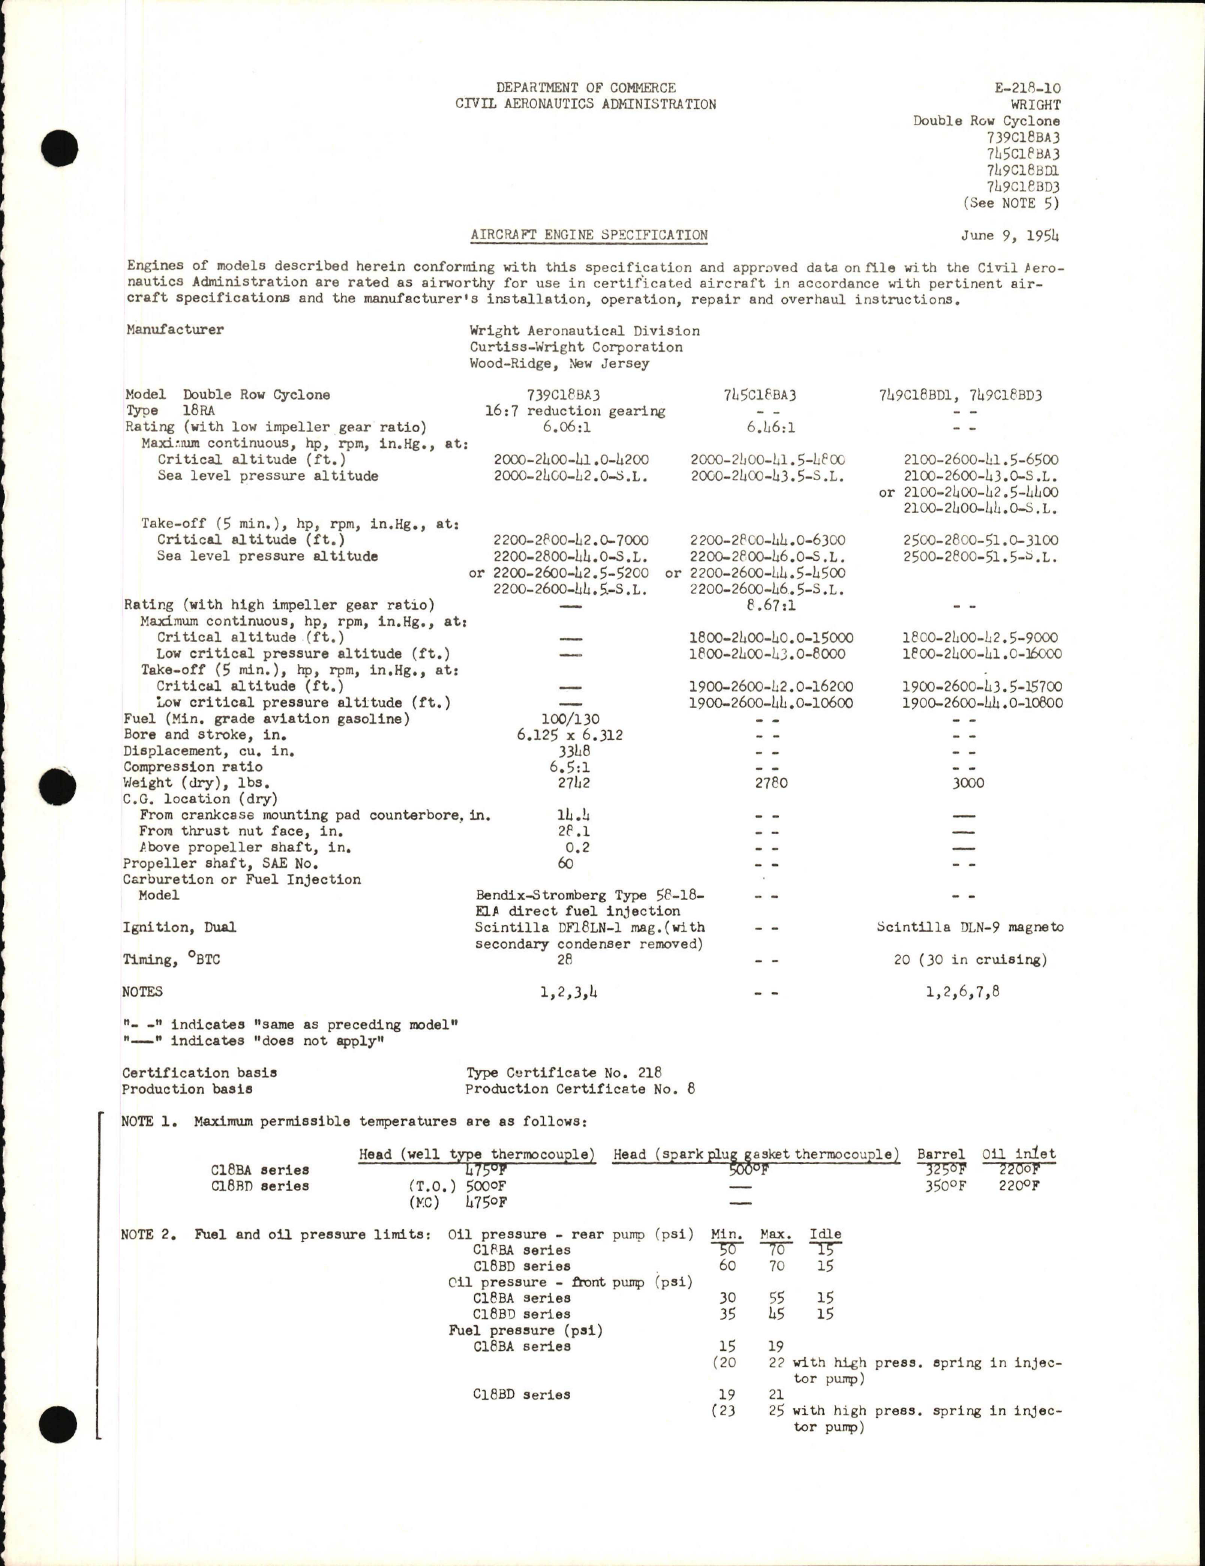 Sample page 1 from AirCorps Library document: 739C18BA3, 745C18BA3, 749C18BD1 and 749C18BD3 Double Row Cyclone